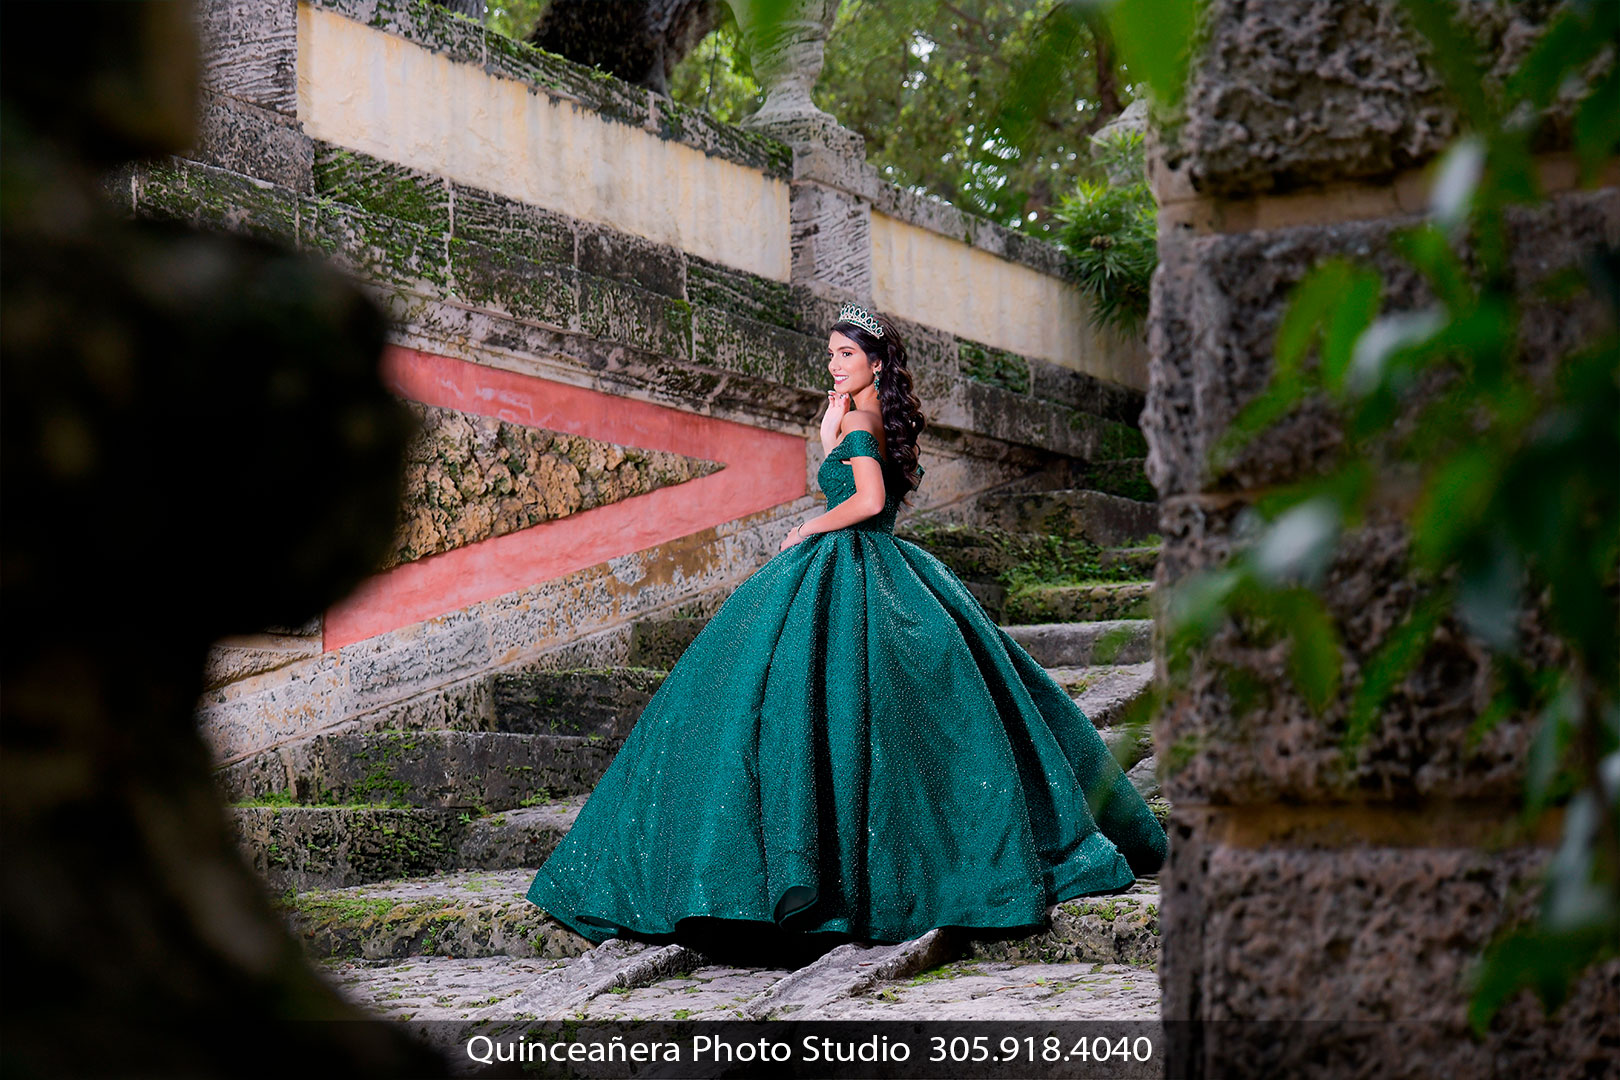 Creative Quinceanera Photography, Experience the Artistry of Our Photographers